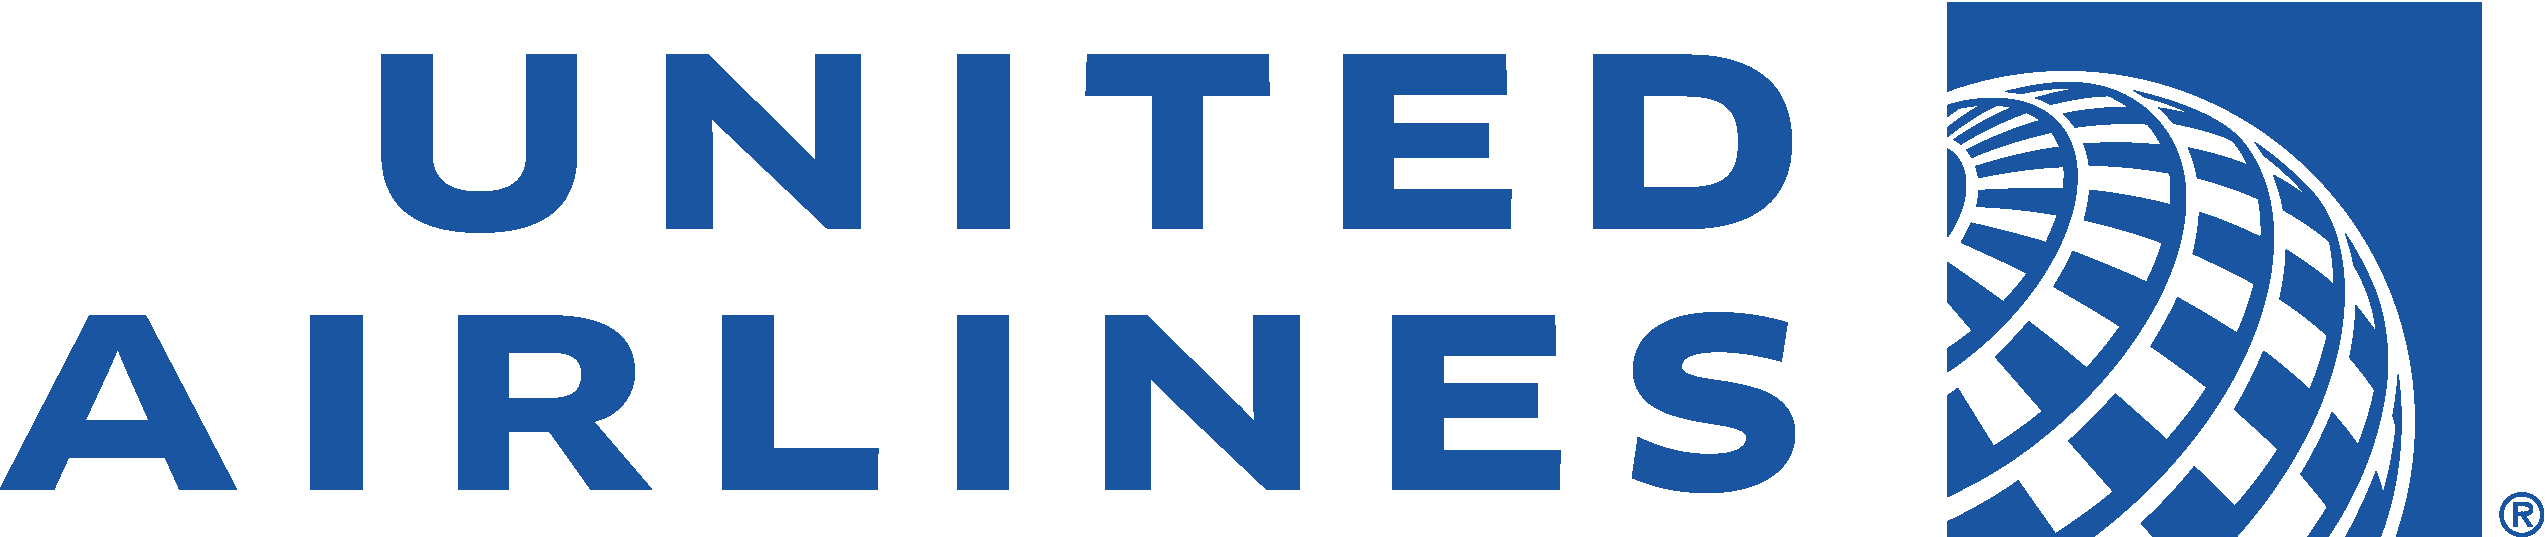 United Airlines Logo   Pluspng - United Airlines, Transparent background PNG HD thumbnail